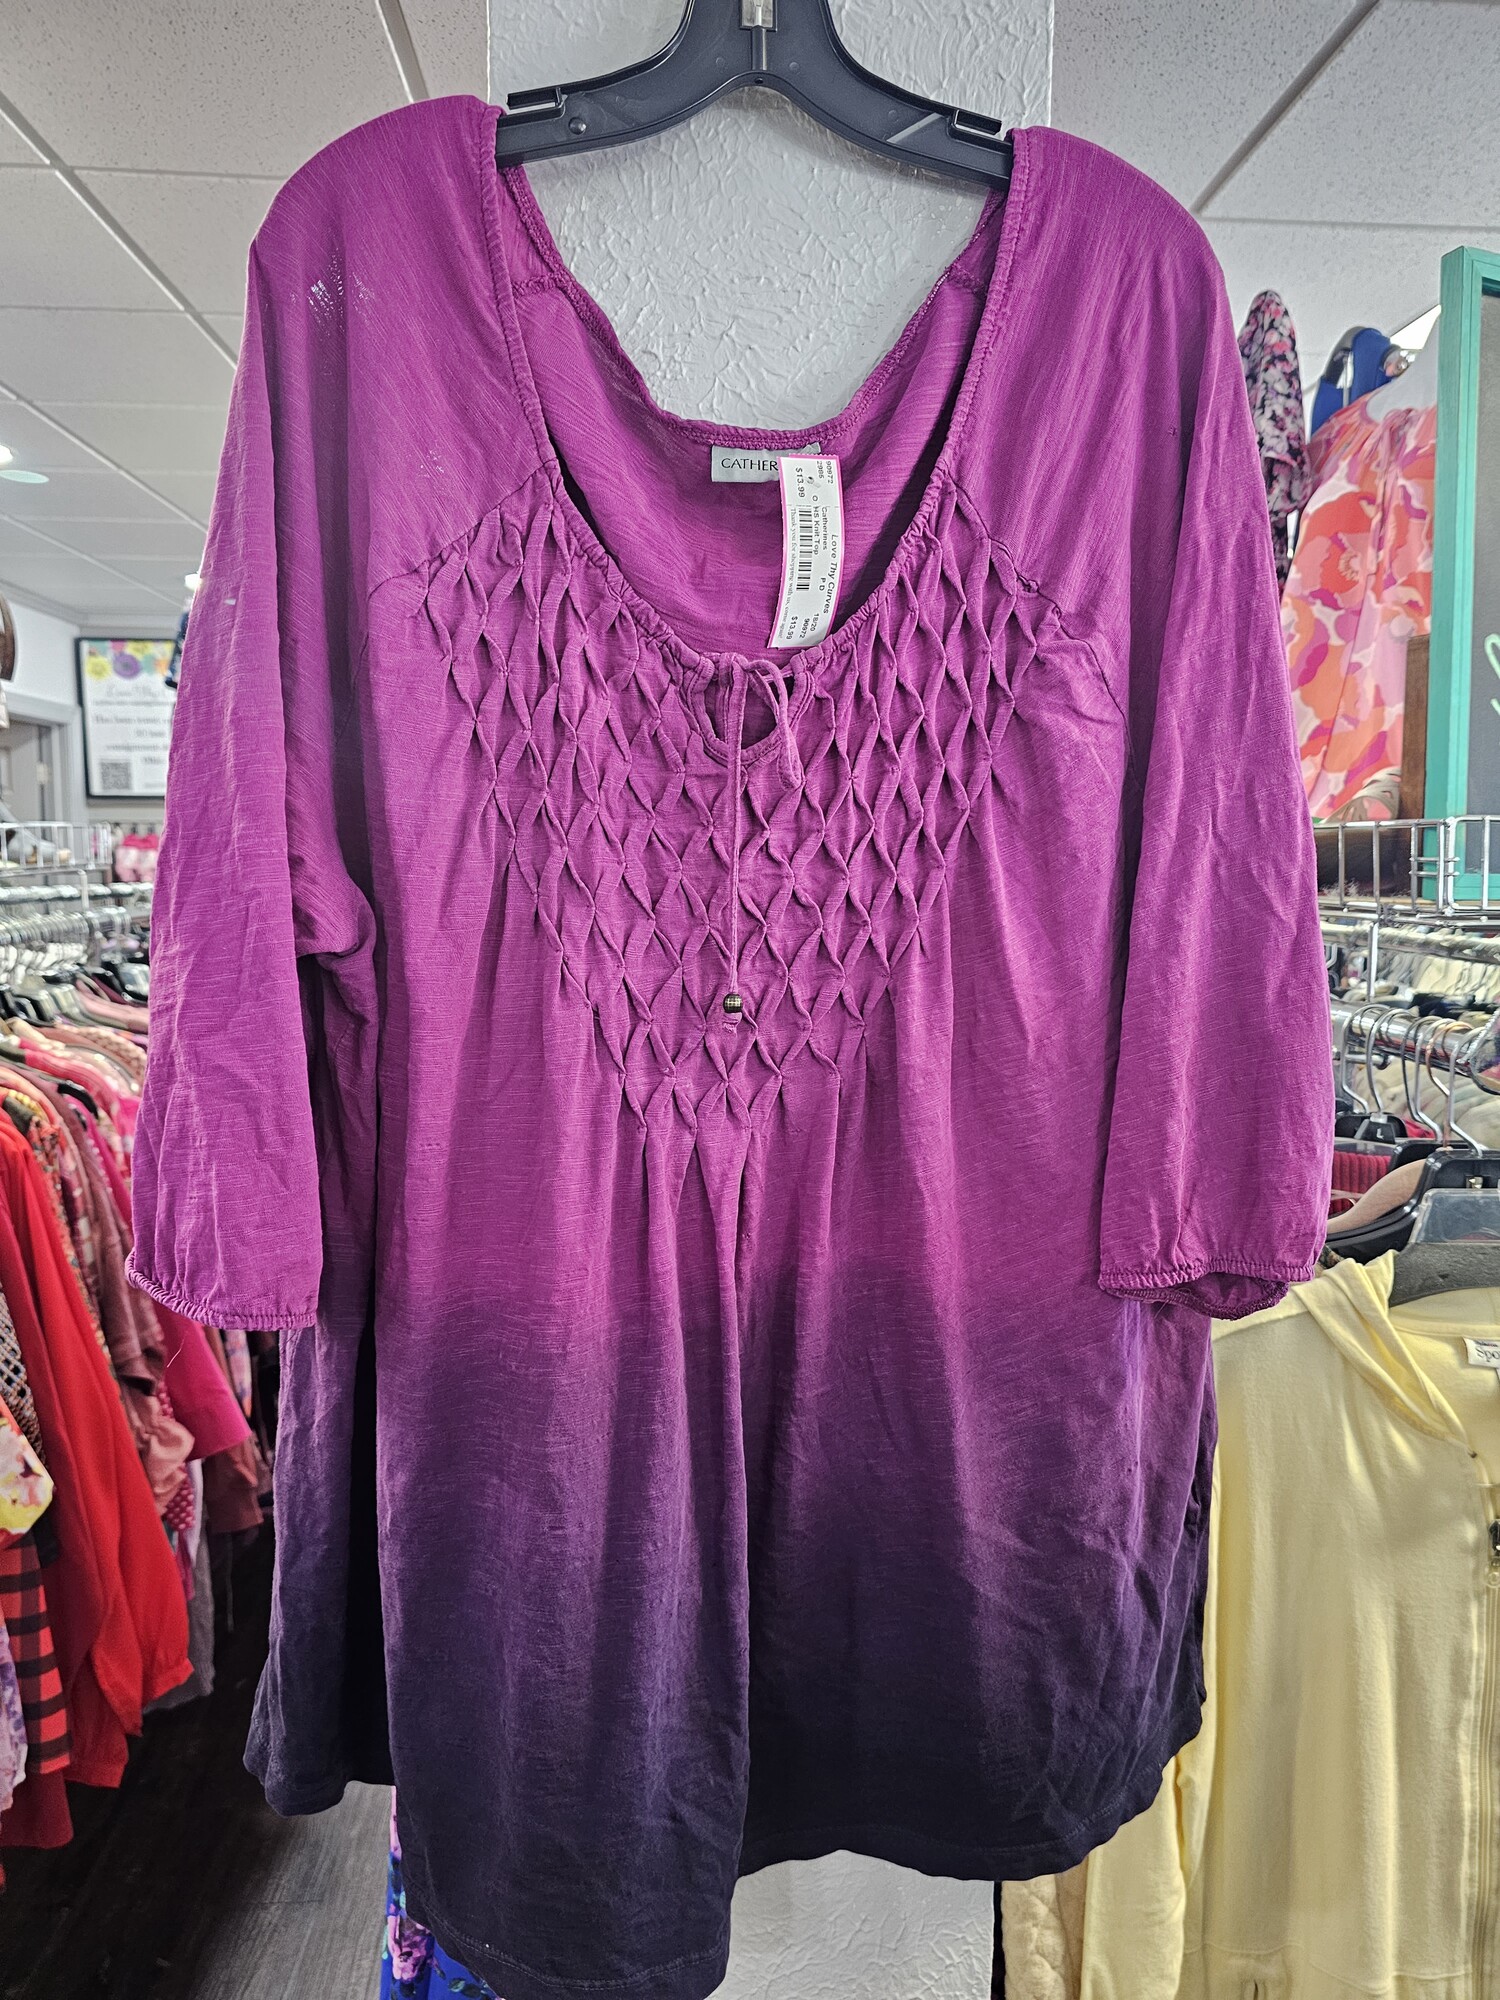 Cute ombre top with half sleeve and boho look in a purple to burgandy plum bottom.